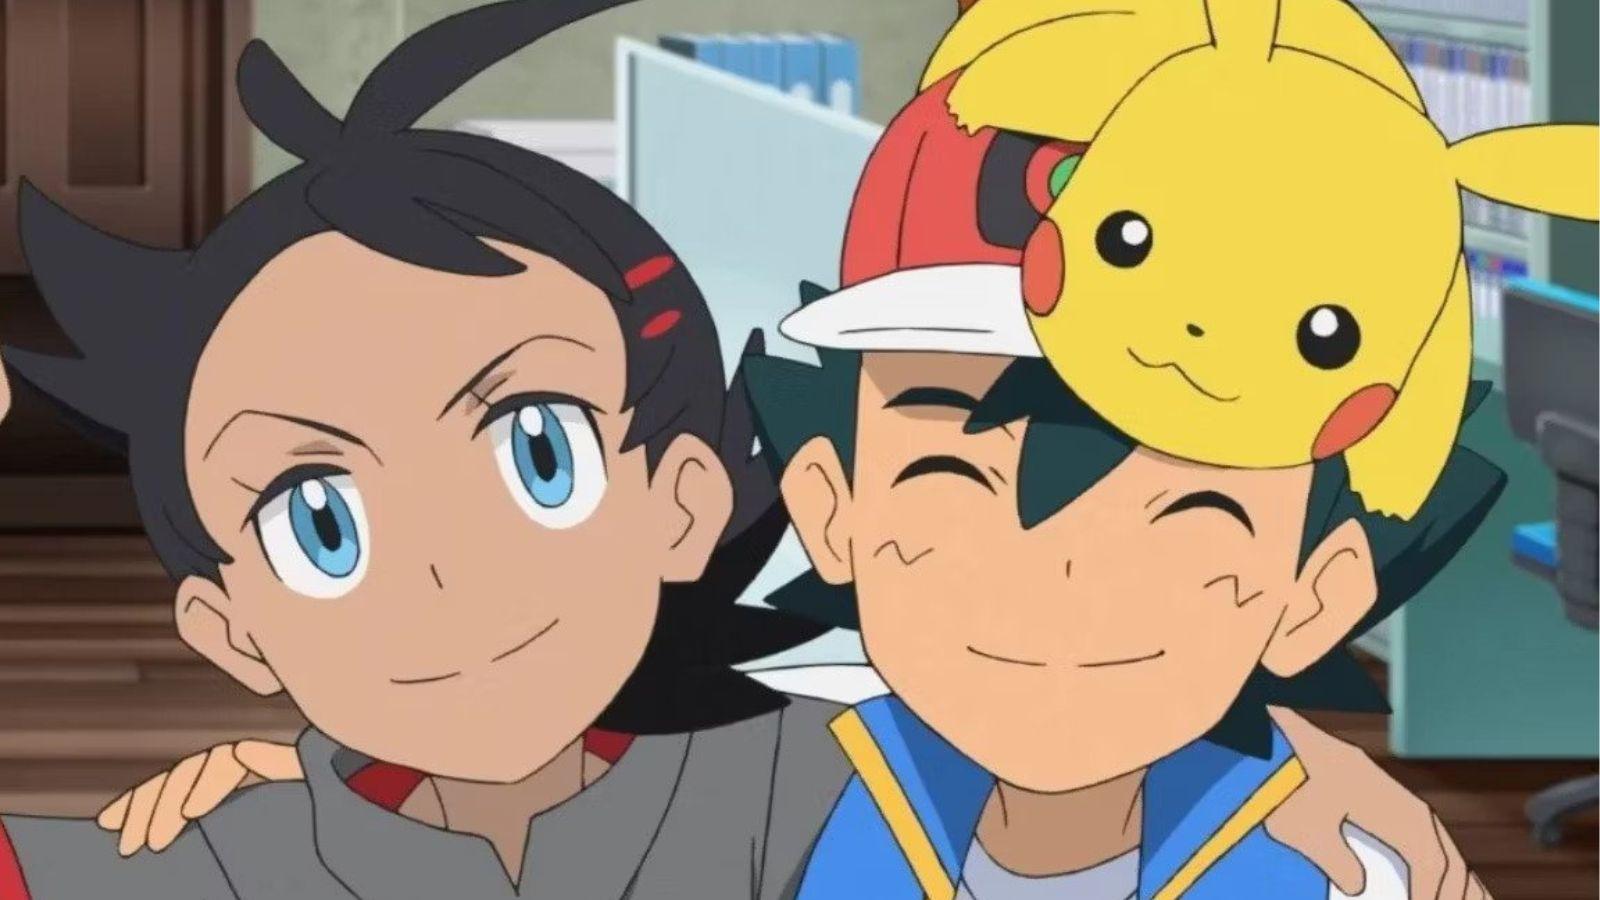 Pokemon anime schedule leaked with new episodes after Ultimate Journeys -  Dexerto